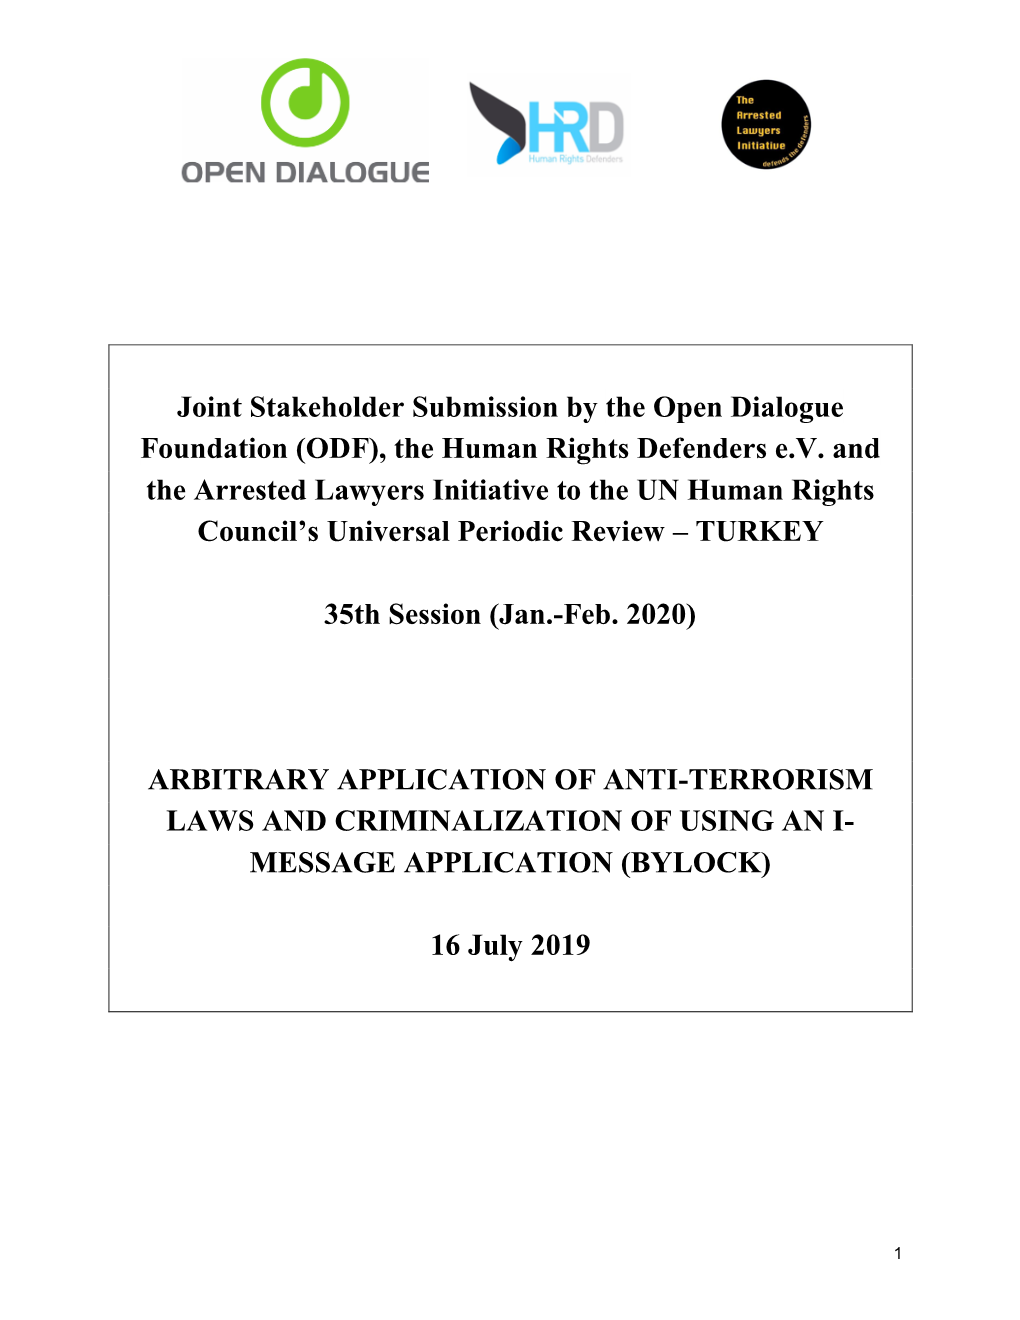 Joint Stakeholder Submission by the Open Dialogue Foundation (ODF), the Human Rights Defenders E.V. and the Arrested Lawyers